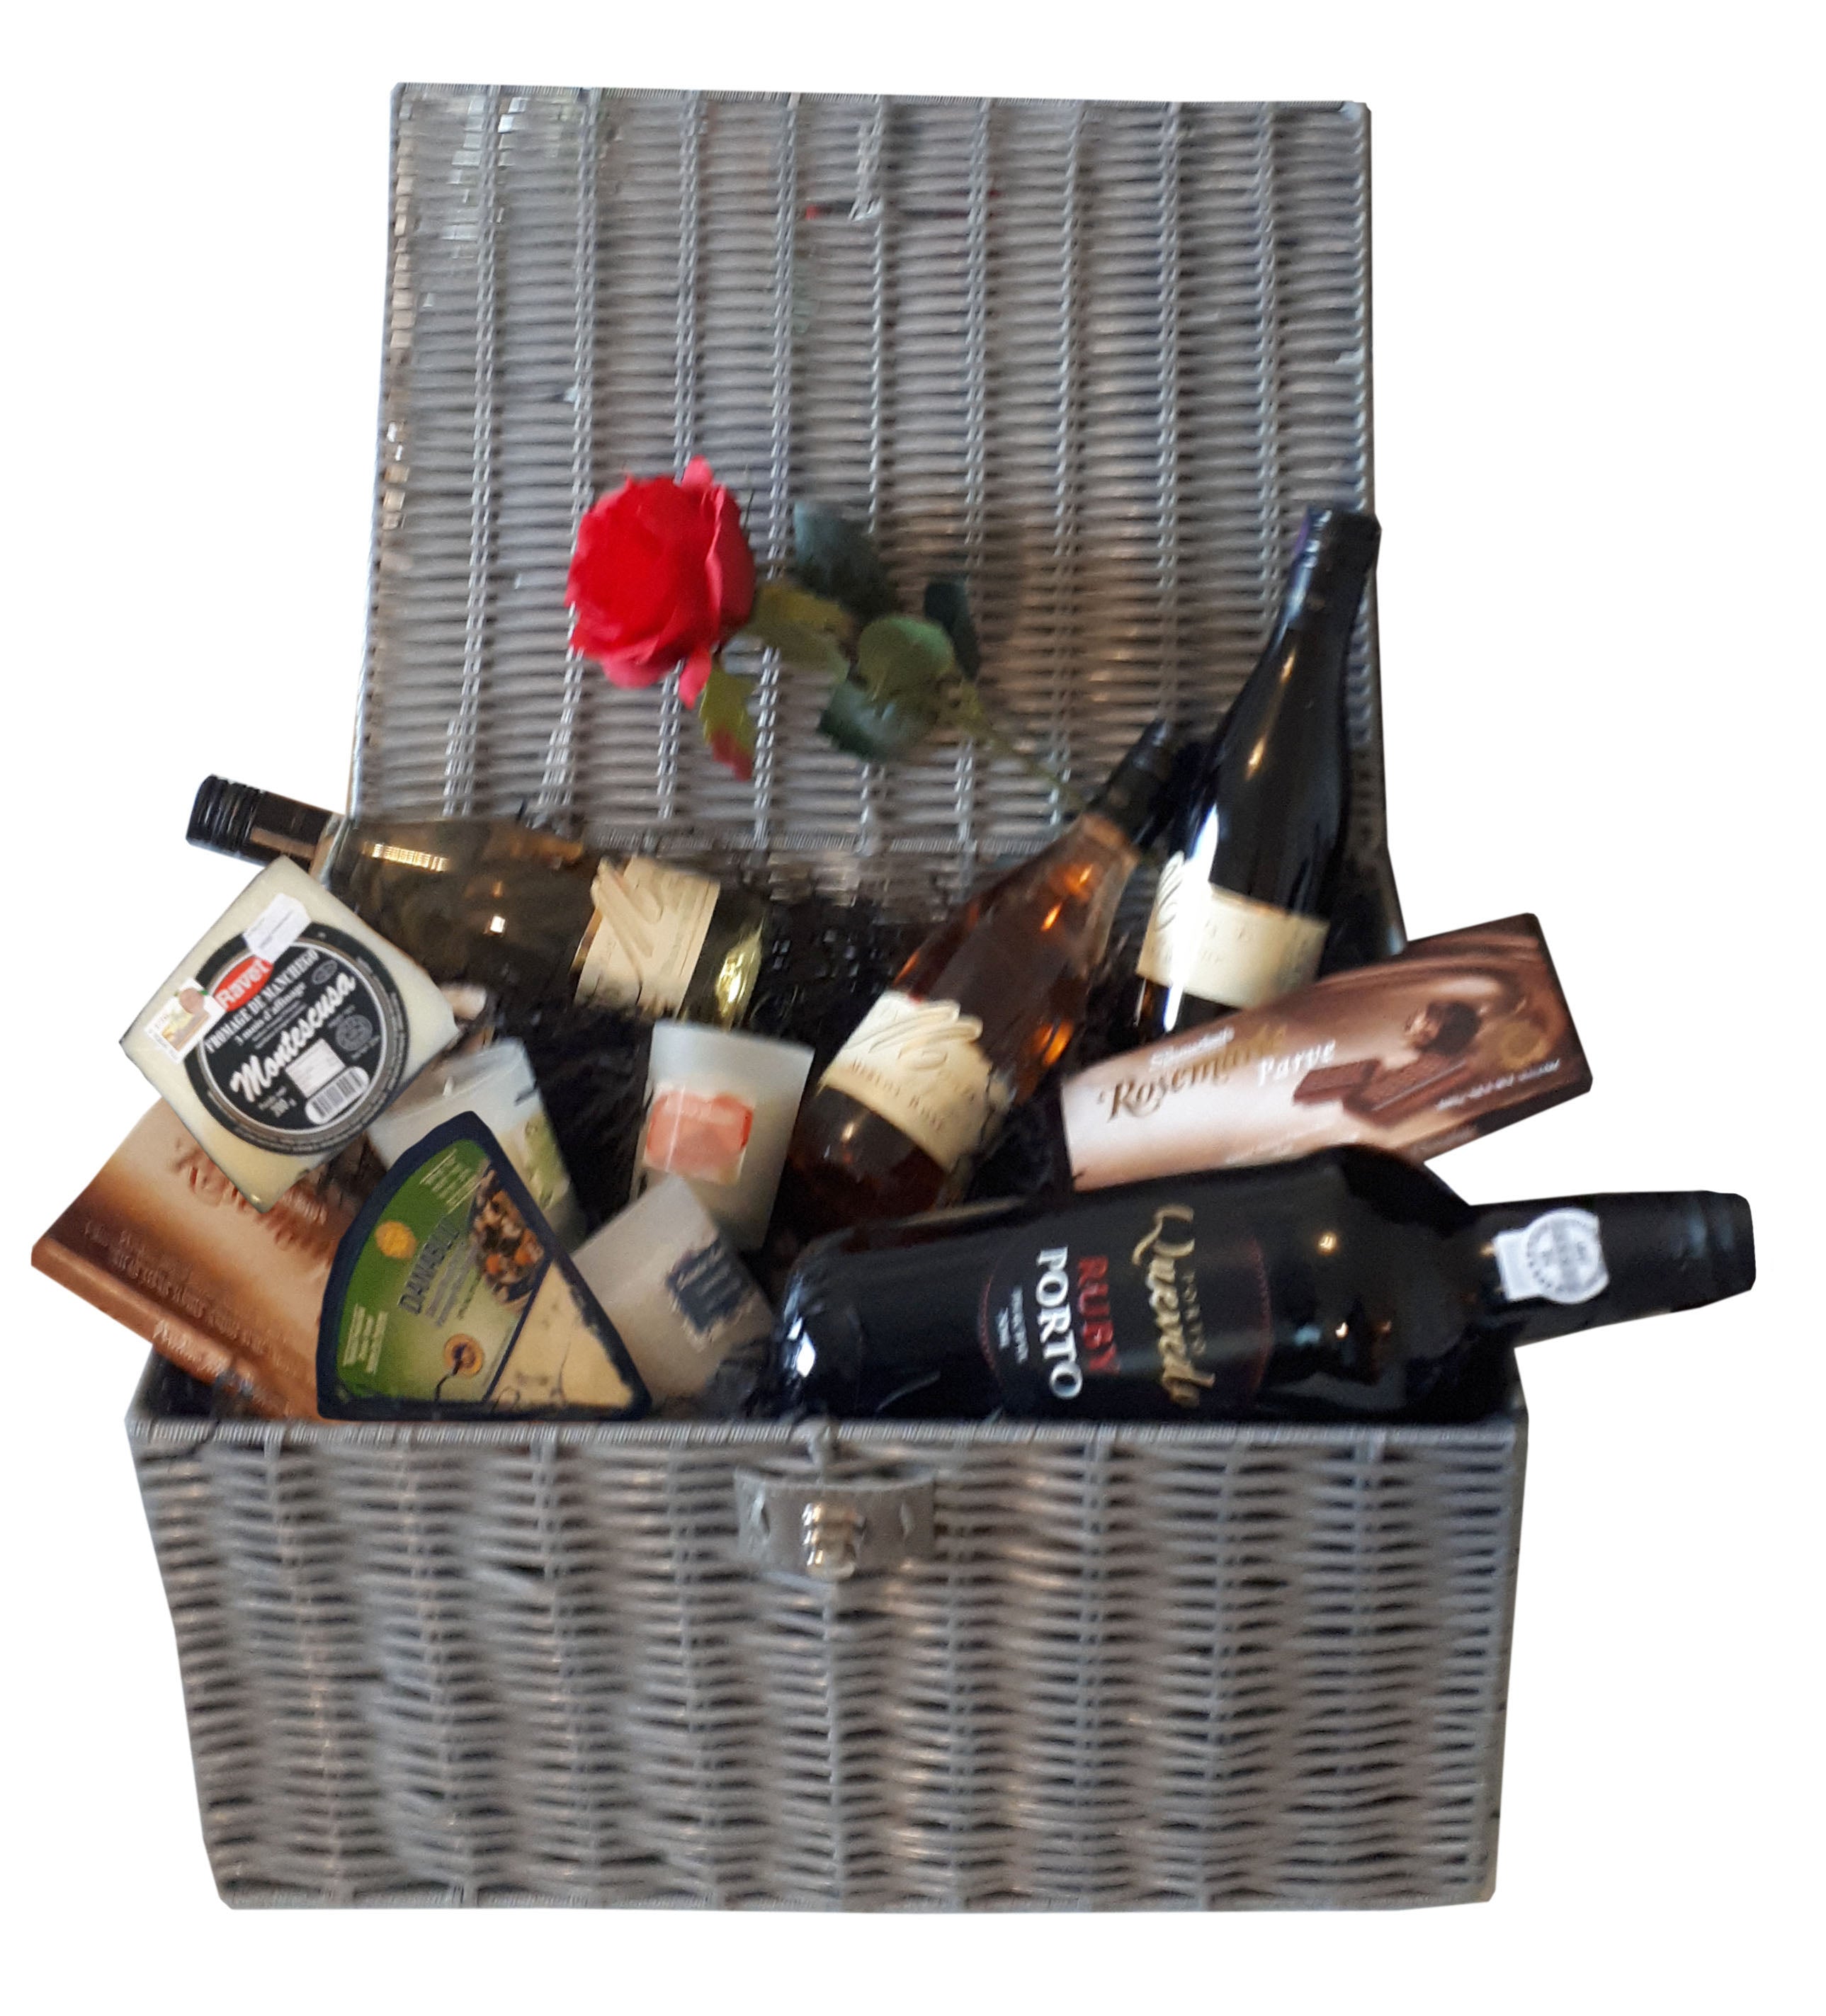 PURIM KOSHER LUXURY FRENCH WINE, CHEESE AND CHOCOLATE HAMPER GIFT With A Choice Of Fine French Wines  & Les Mont De France Wines With A Variety Of Cheese, Chocolates, Fragrant Candles And An Option For A Rose Or Flower Spray.  Delivered Throughout The UK